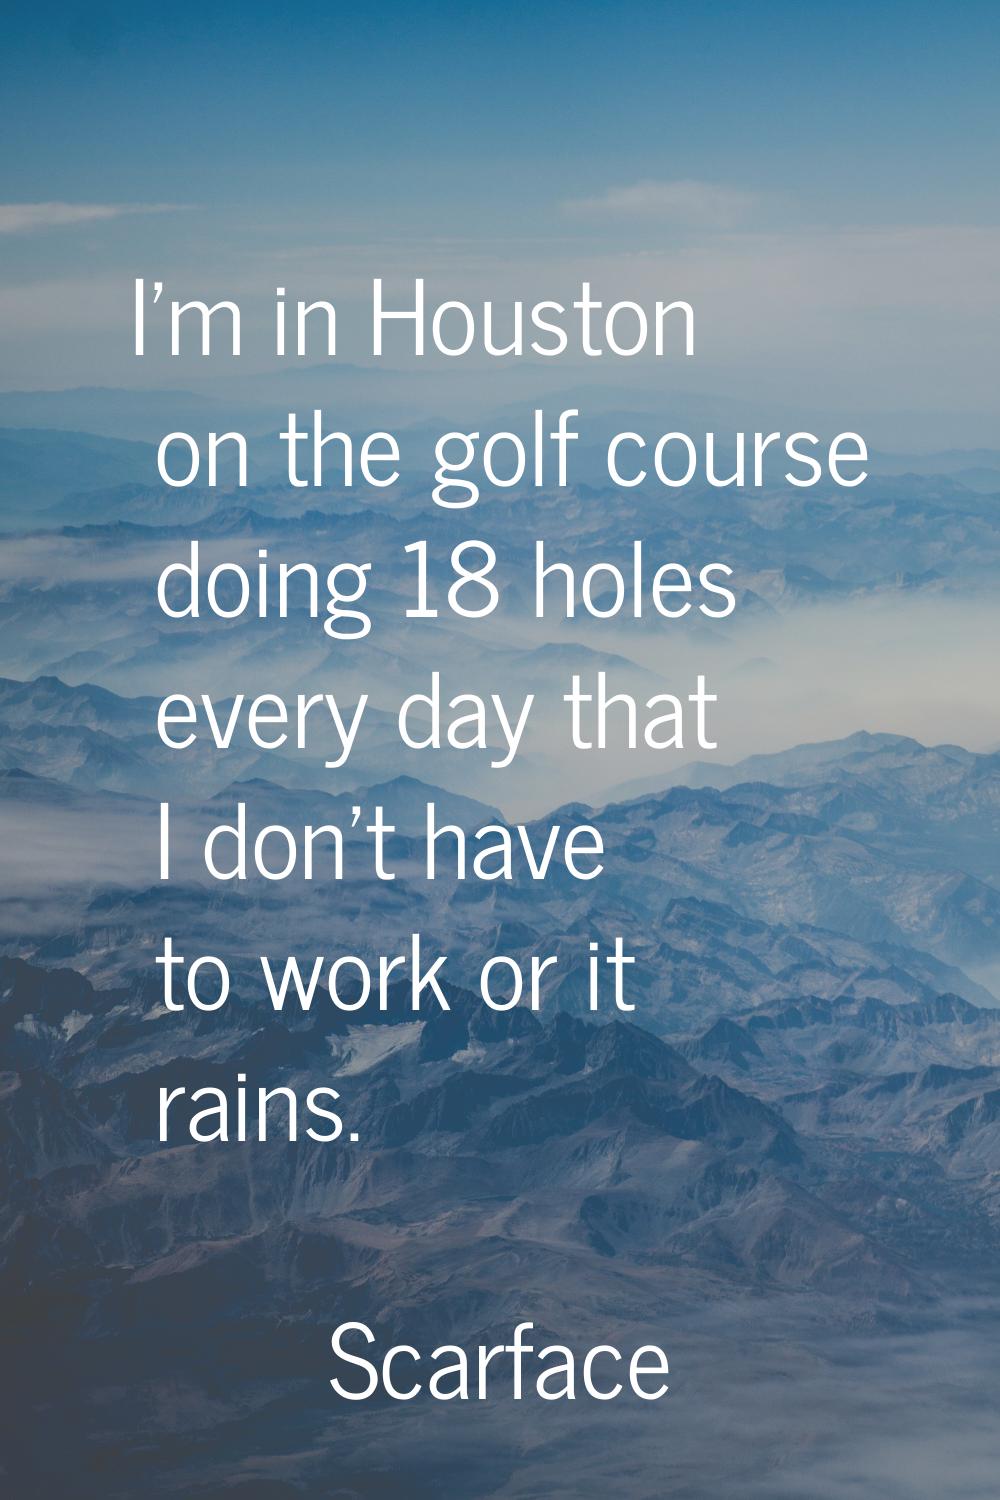 I'm in Houston on the golf course doing 18 holes every day that I don't have to work or it rains.